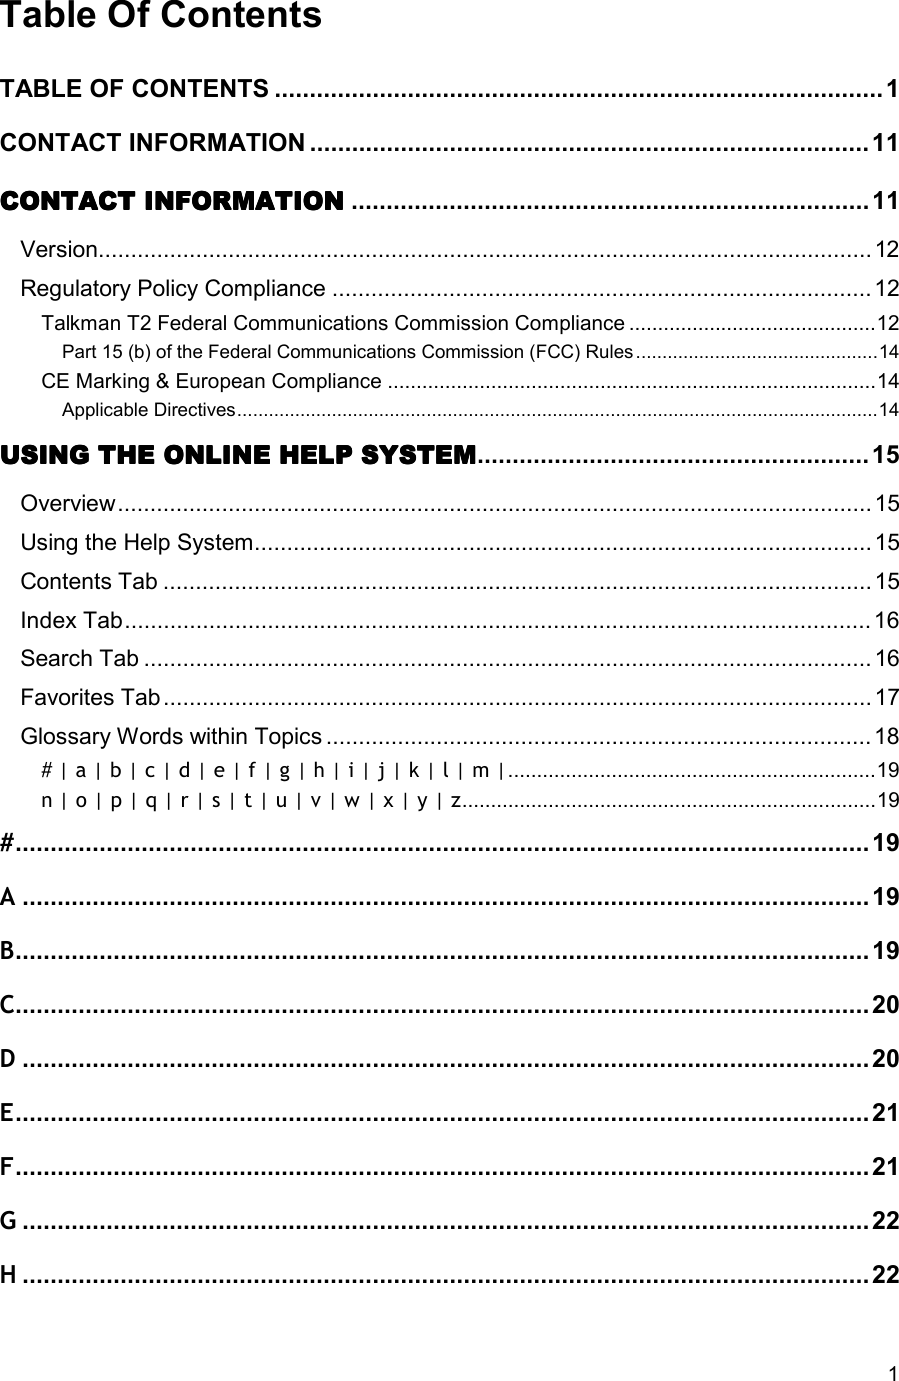  1 Table Of Contents TABLE OF CONTENTS .......................................................................................1 CONTACT INFORMATION ................................................................................11 CONTACT INFORMATIONCONTACT INFORMATIONCONTACT INFORMATIONCONTACT INFORMATION ..........................................................................11 Version.......................................................................................................................12 Regulatory Policy Compliance ...................................................................................12 Talkman T2 Federal Communications Commission Compliance ...........................................12 Part 15 (b) of the Federal Communications Commission (FCC) Rules..............................................14 CE Marking &amp; European Compliance .....................................................................................14 Applicable Directives..........................................................................................................................14 USING THE ONLINE HELUSING THE ONLINE HELUSING THE ONLINE HELUSING THE ONLINE HELP SYSTEMP SYSTEMP SYSTEMP SYSTEM........................................................ 15 Overview....................................................................................................................15 Using the Help System............................................................................................... 15 Contents Tab .............................................................................................................15 Index Tab................................................................................................................... 16 Search Tab ................................................................................................................16 Favorites Tab............................................................................................................. 17 Glossary Words within Topics ....................................................................................18 # | a | b | c | d | e | f | g | h | i | j | k | l | m |................................................................19 n | o | p | q | r | s | t | u | v | w | x | y | z........................................................................19 #..........................................................................................................................19 A.........................................................................................................................19 B..........................................................................................................................19 C..........................................................................................................................20 D.........................................................................................................................20 E..........................................................................................................................21 F..........................................................................................................................21 G.........................................................................................................................22 H.........................................................................................................................22 